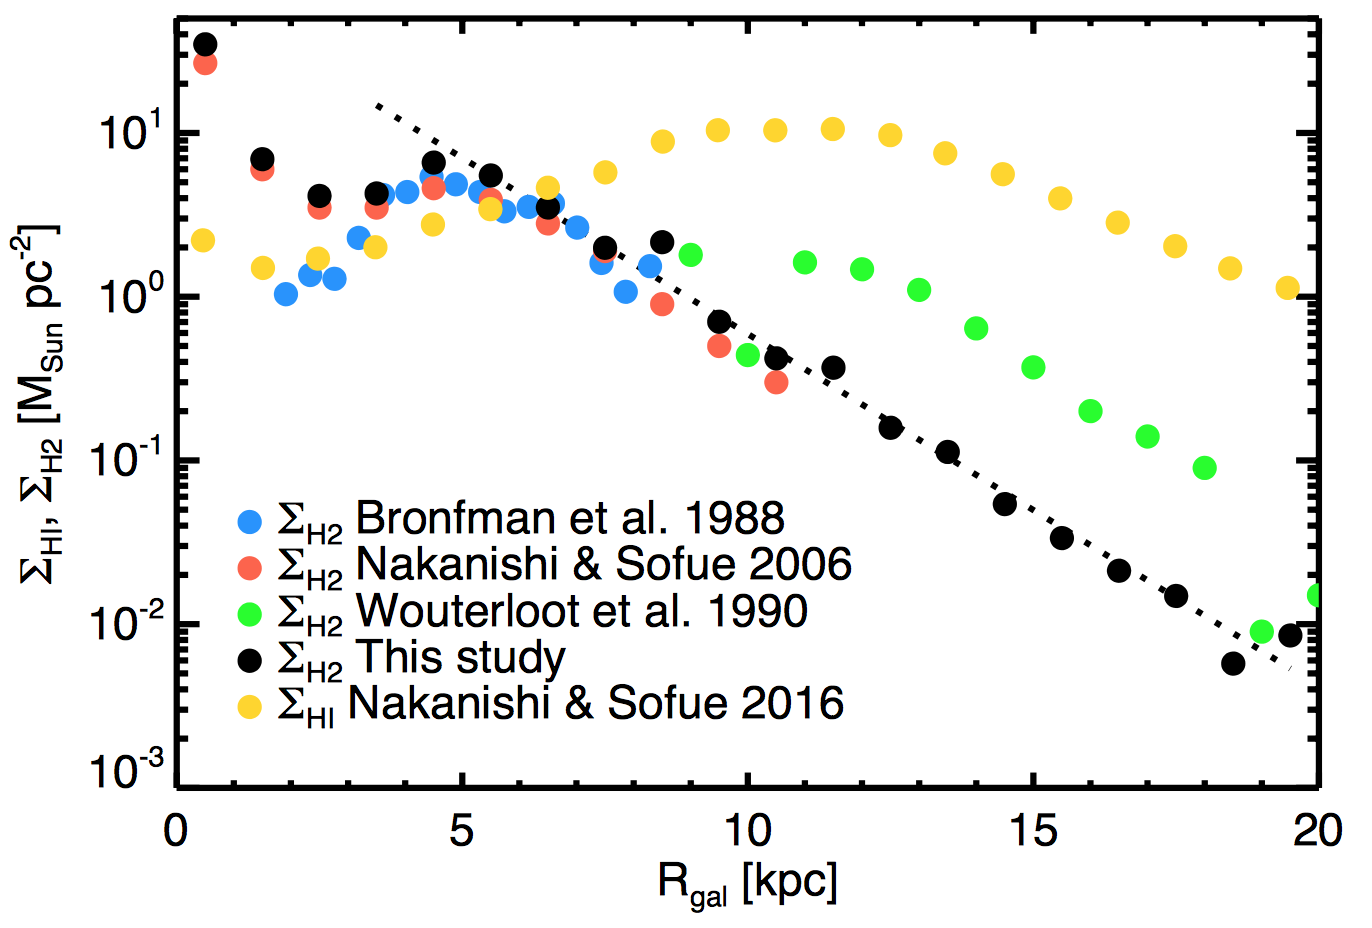 surface density of H_2 in the Milky Way, from Miville-Deschênes et al. (2017)